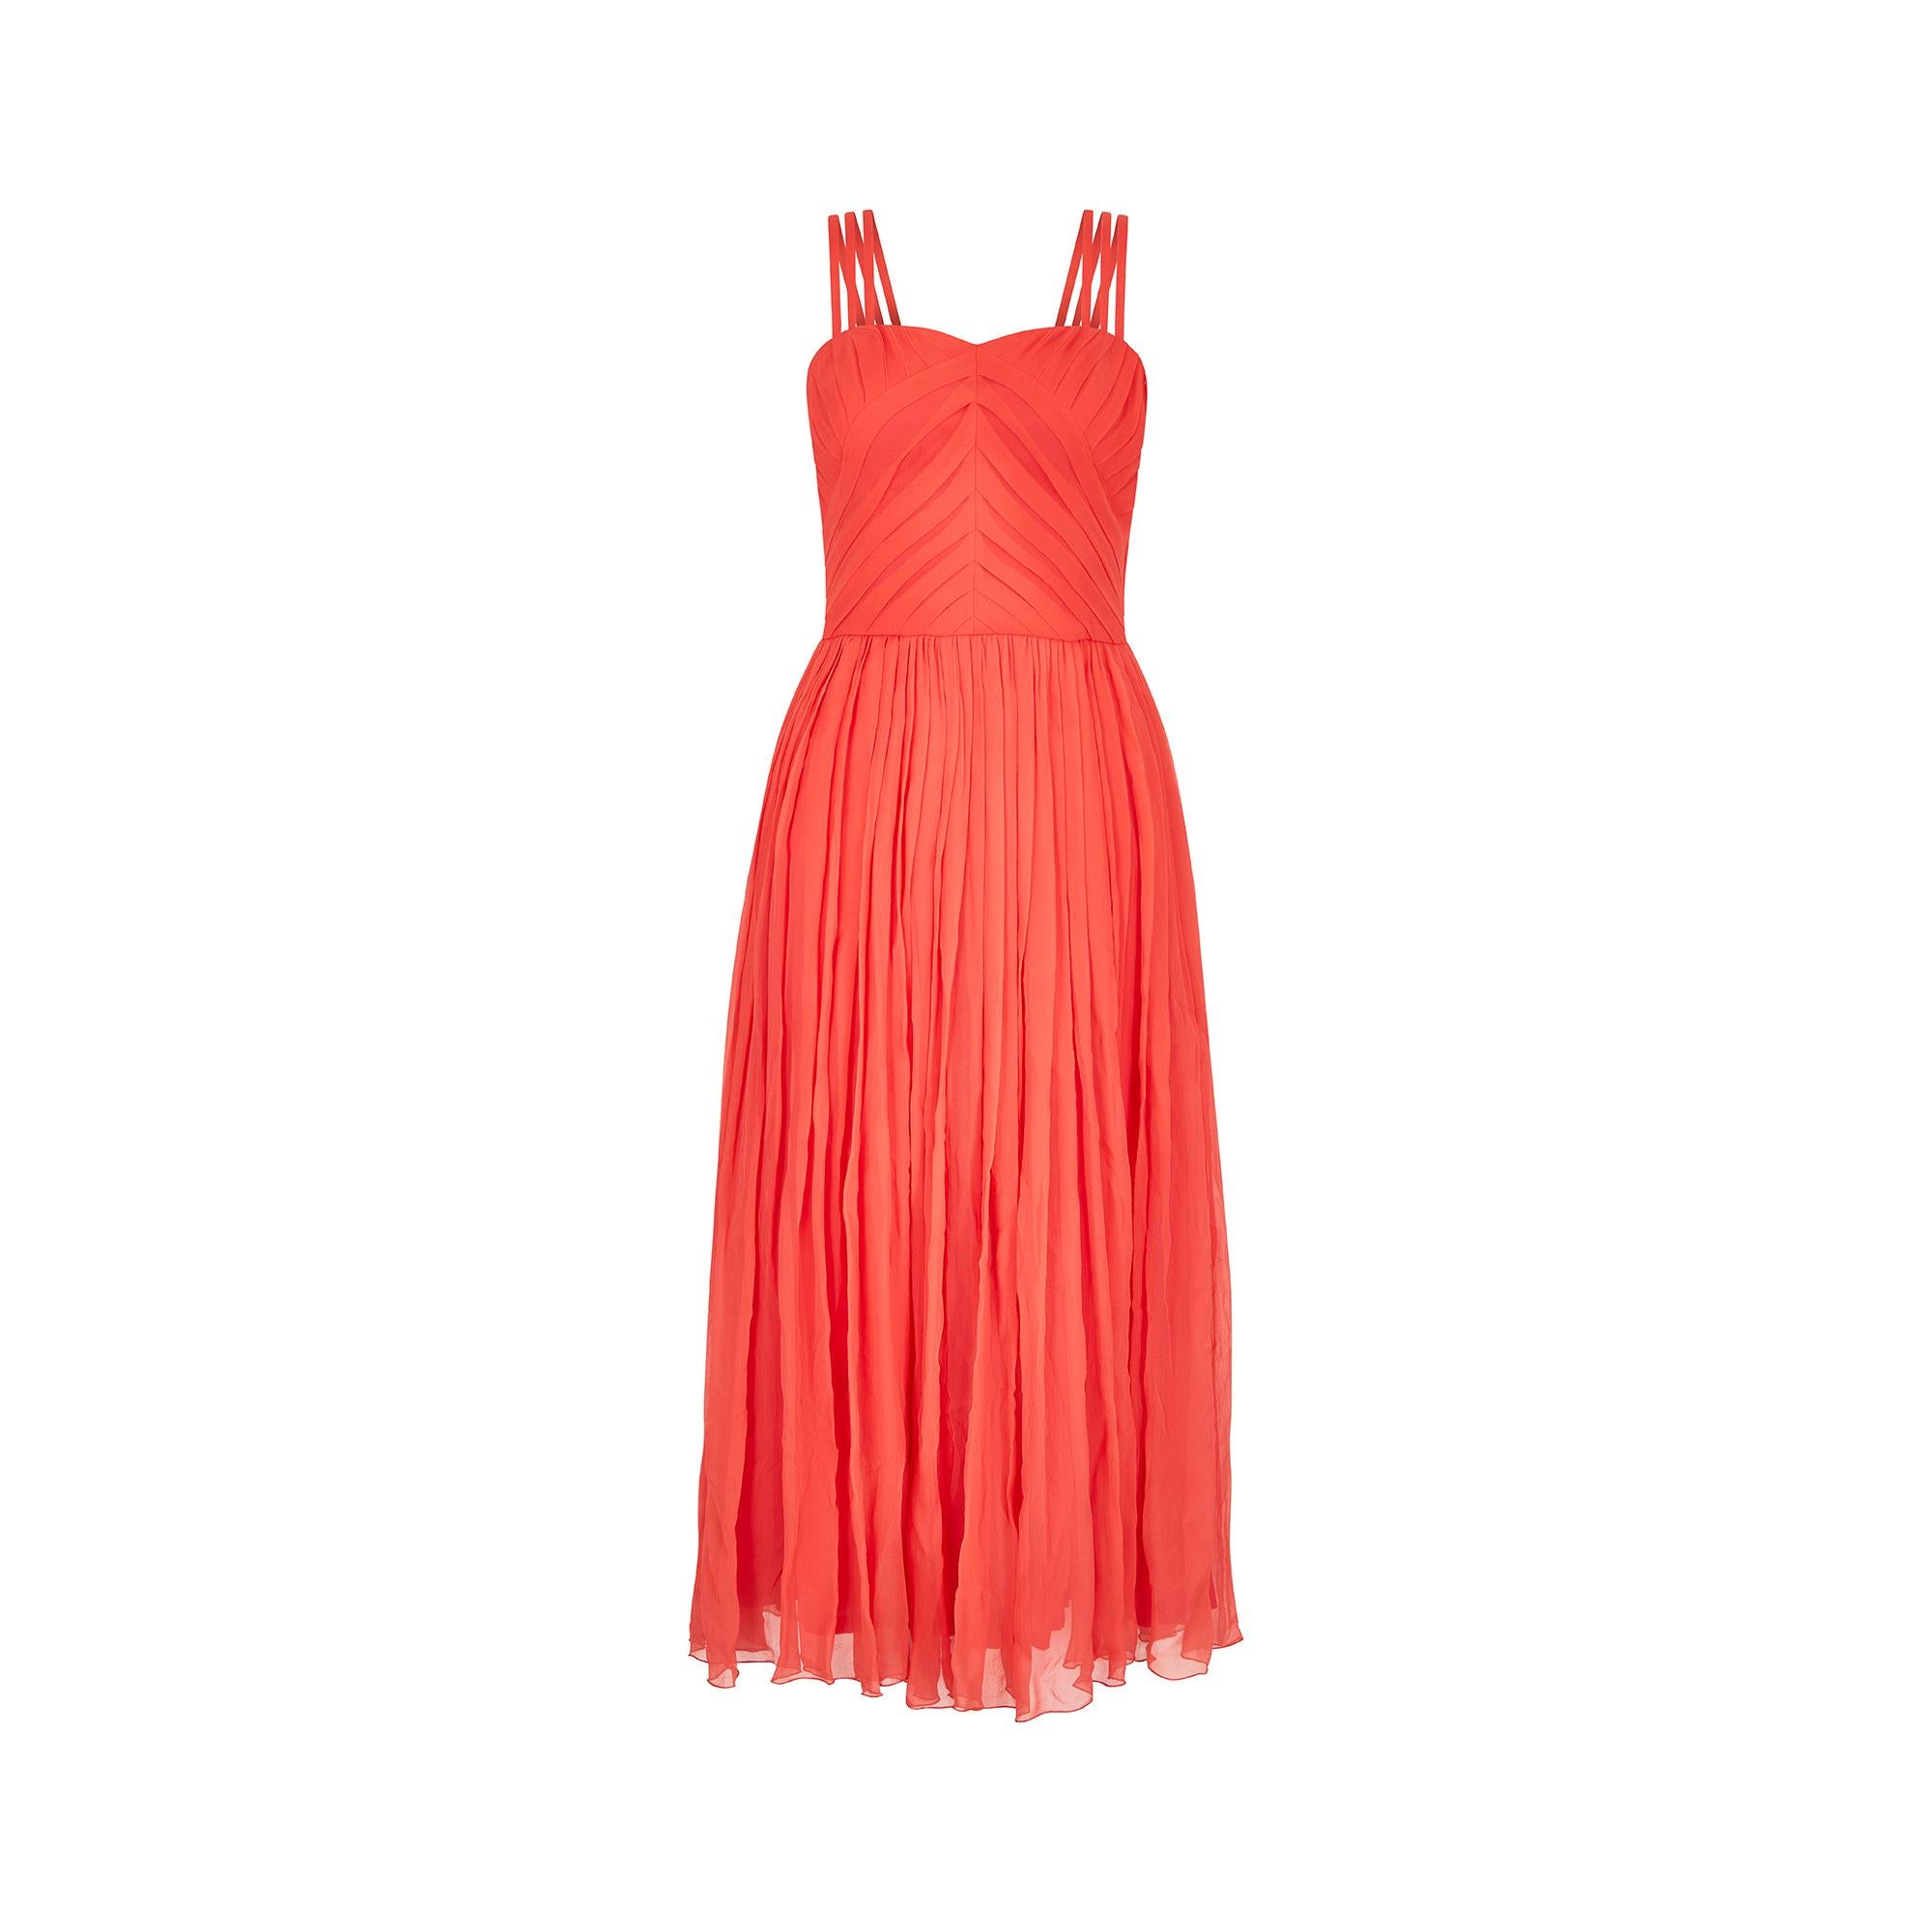 This is mid to late1980s midi dress by Louis Feraud is perfect for an occasion or summer party. It has a fitted ruched bodice and a sweetheart neckline, with lovely pleated shaping to the bust area, finished off with triple spaghetti straps to